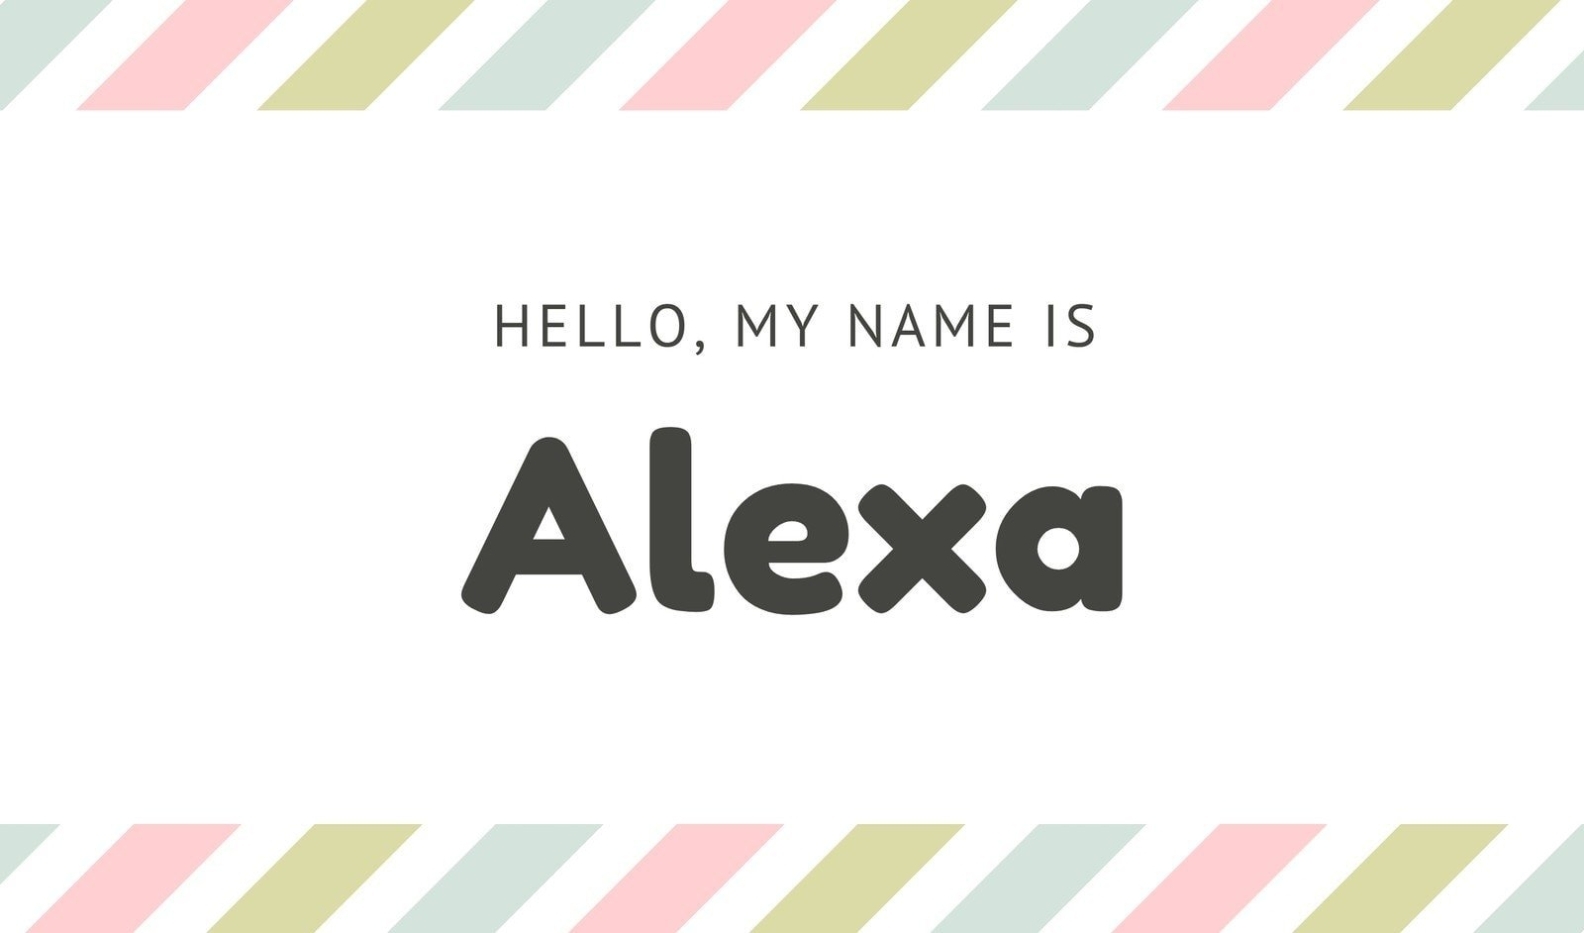 Free Online Name Tags Maker: Design A Custom Name Tag - Canva within Free Name Label Templates